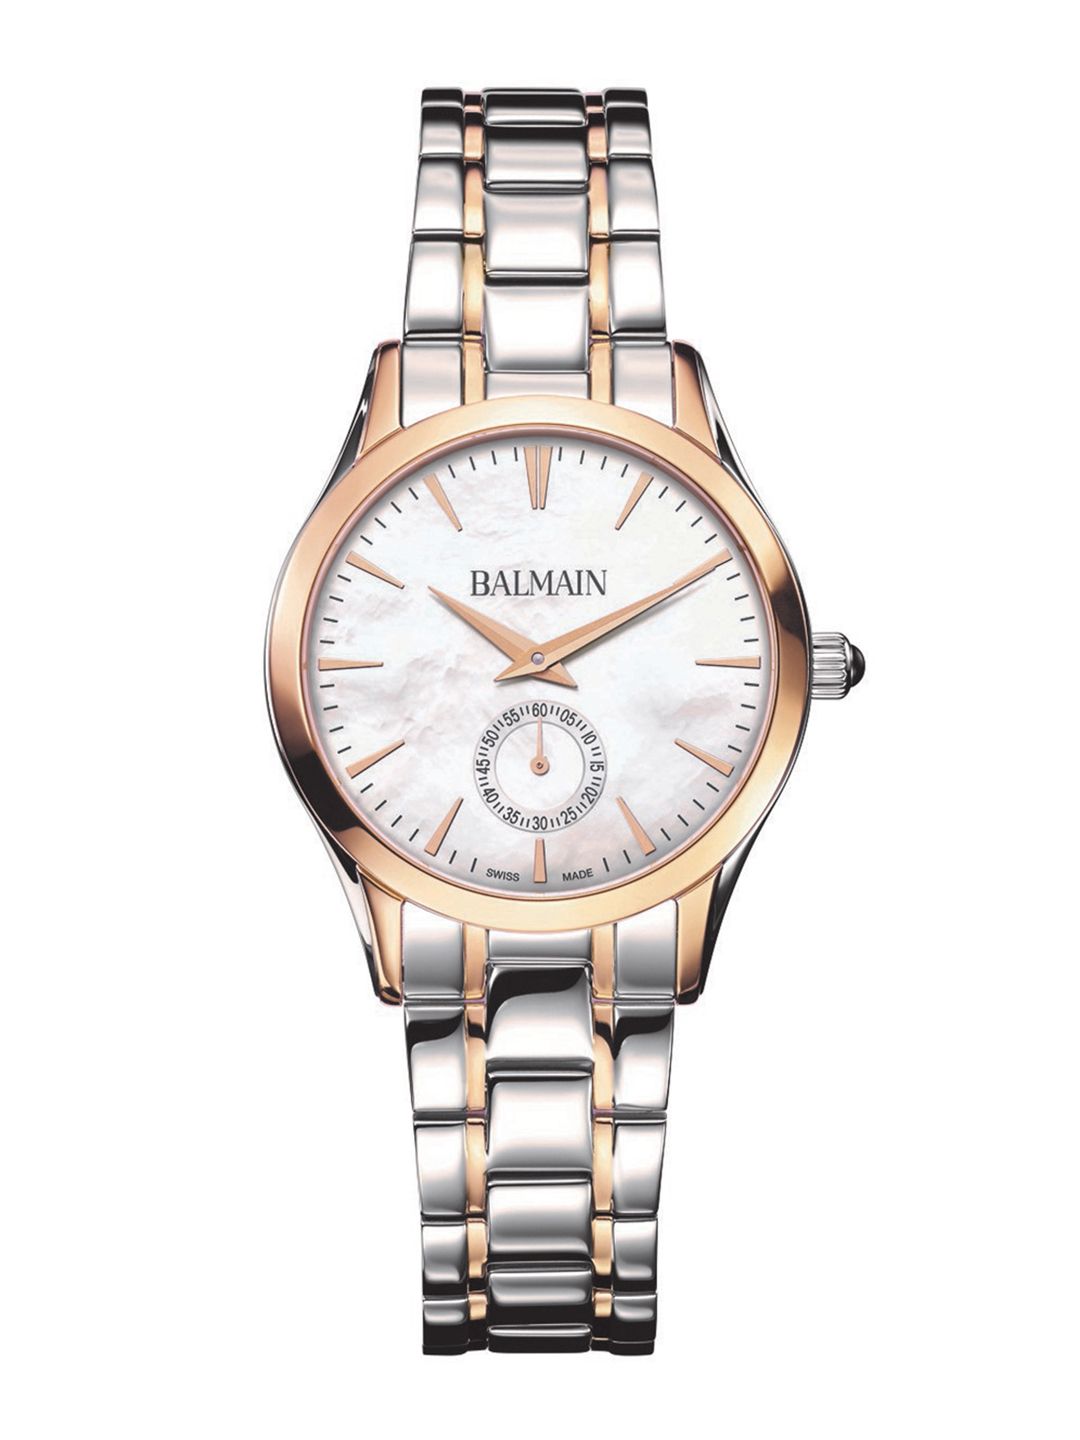 Balmain Classic R Lady Small Second Off-White Swiss Made Mother of Pearl Analogue Watch B47183386 Price in India